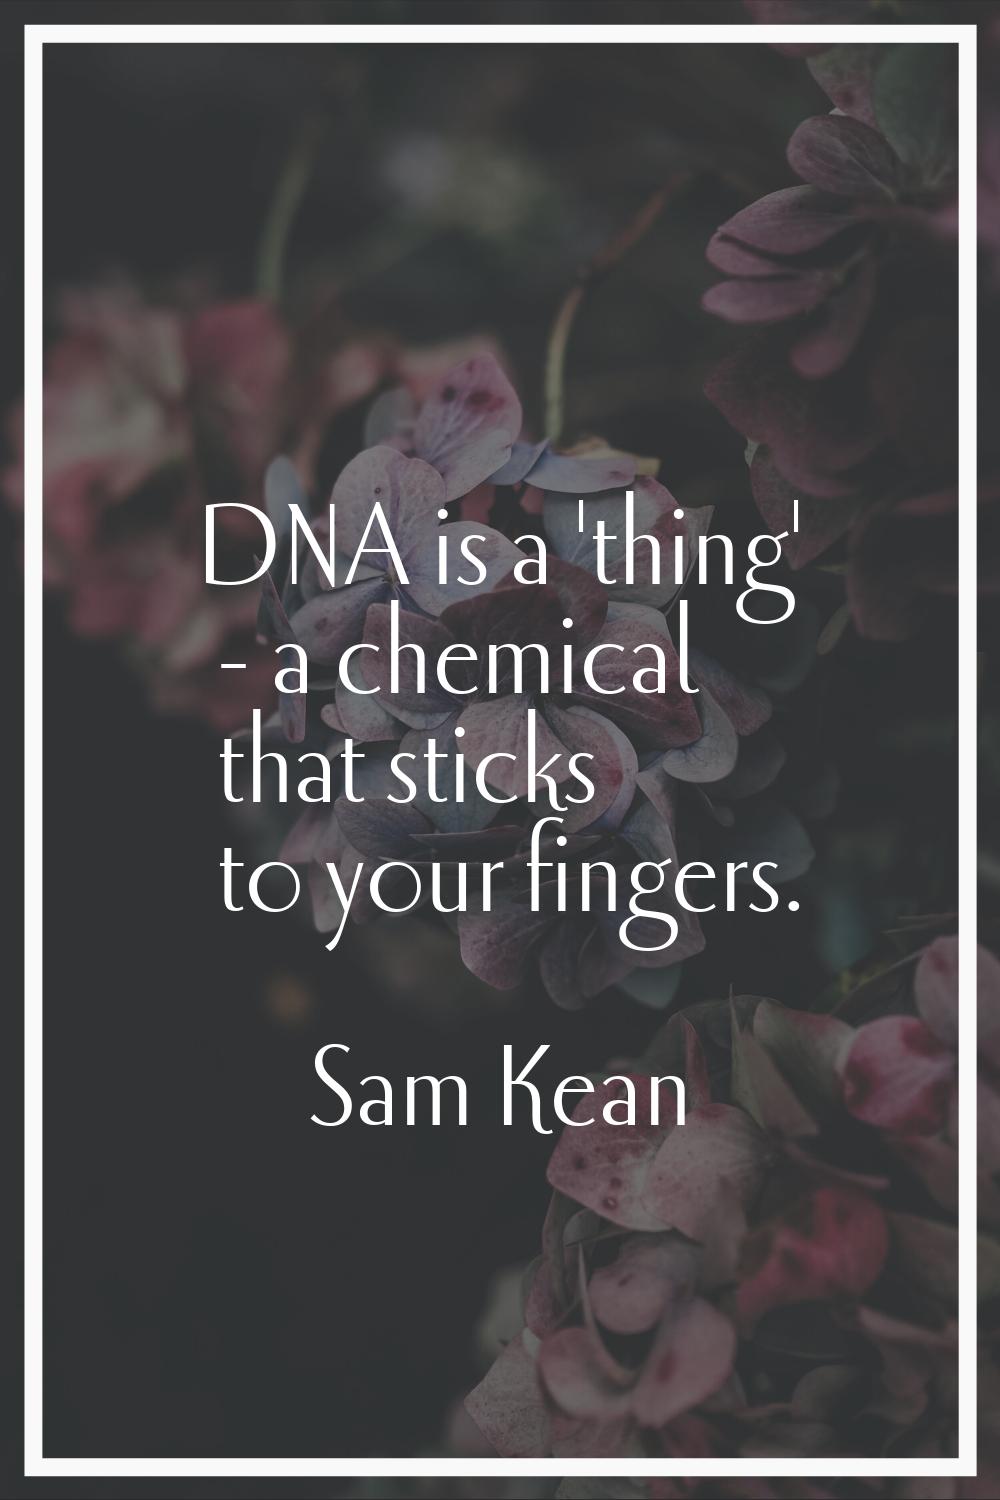 DNA is a 'thing' - a chemical that sticks to your fingers.